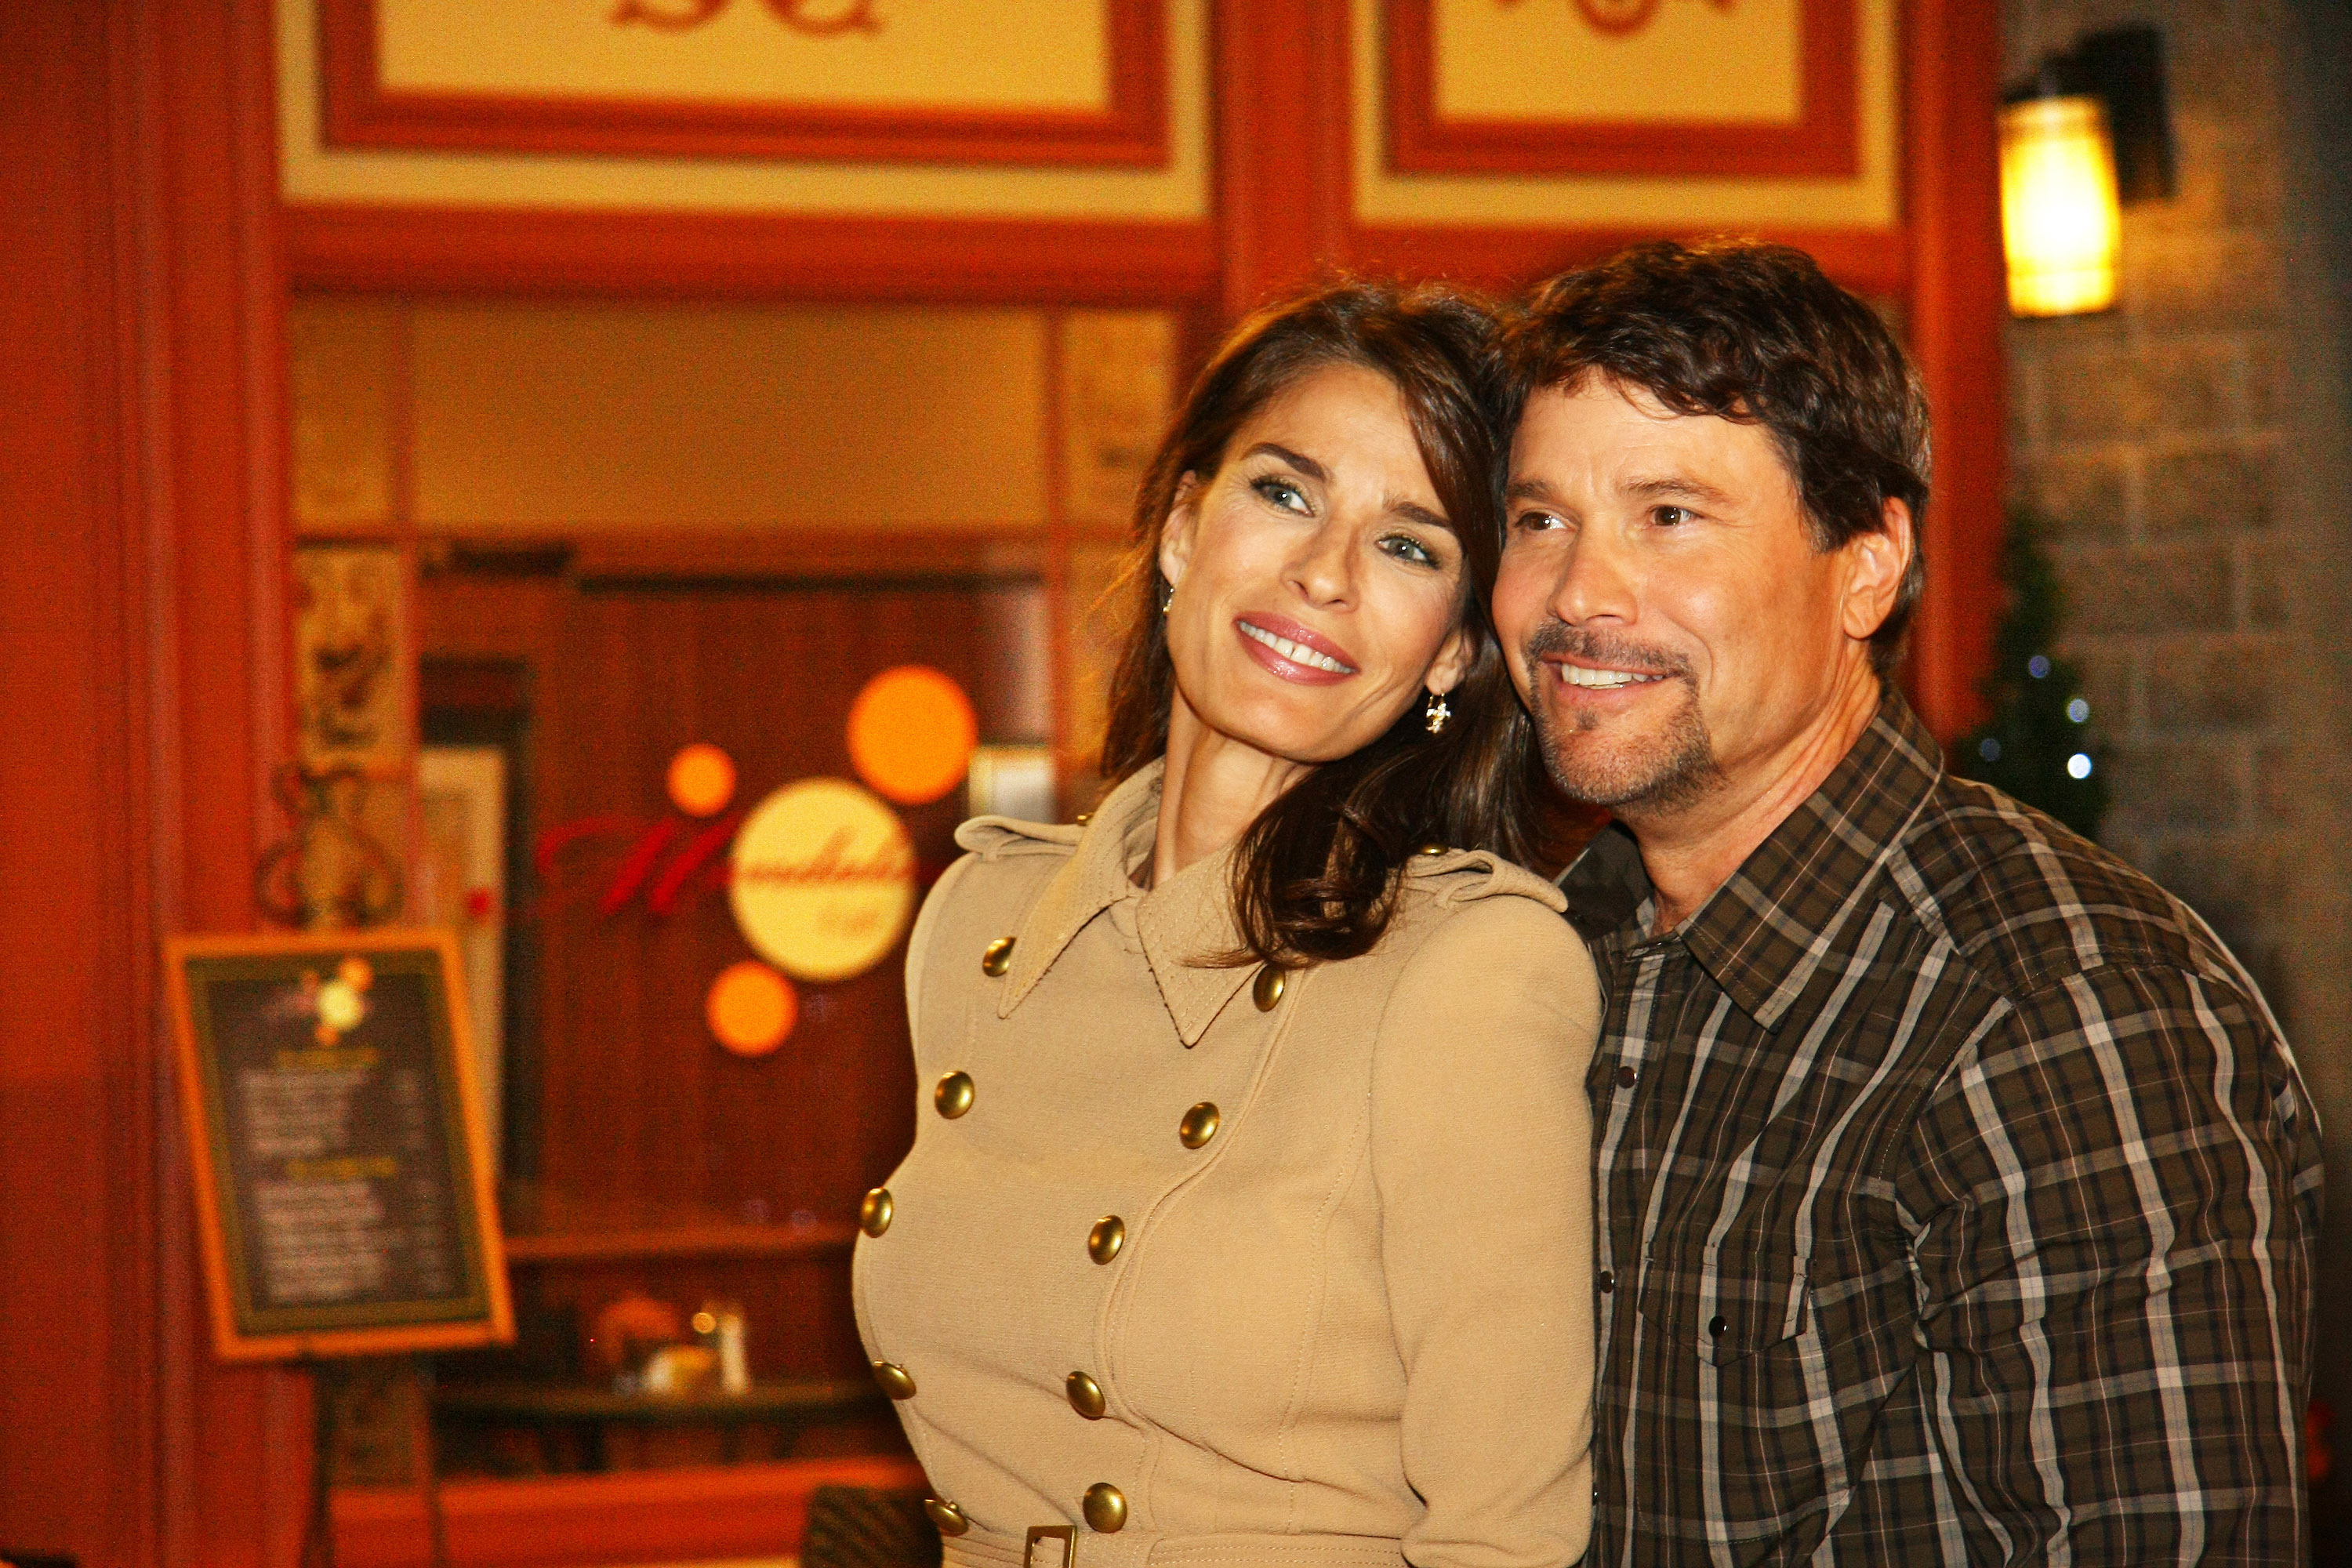 Peter Reckell and Kristian Alfonso on "Days of Our Lives," 2006 | Source: Getty Images